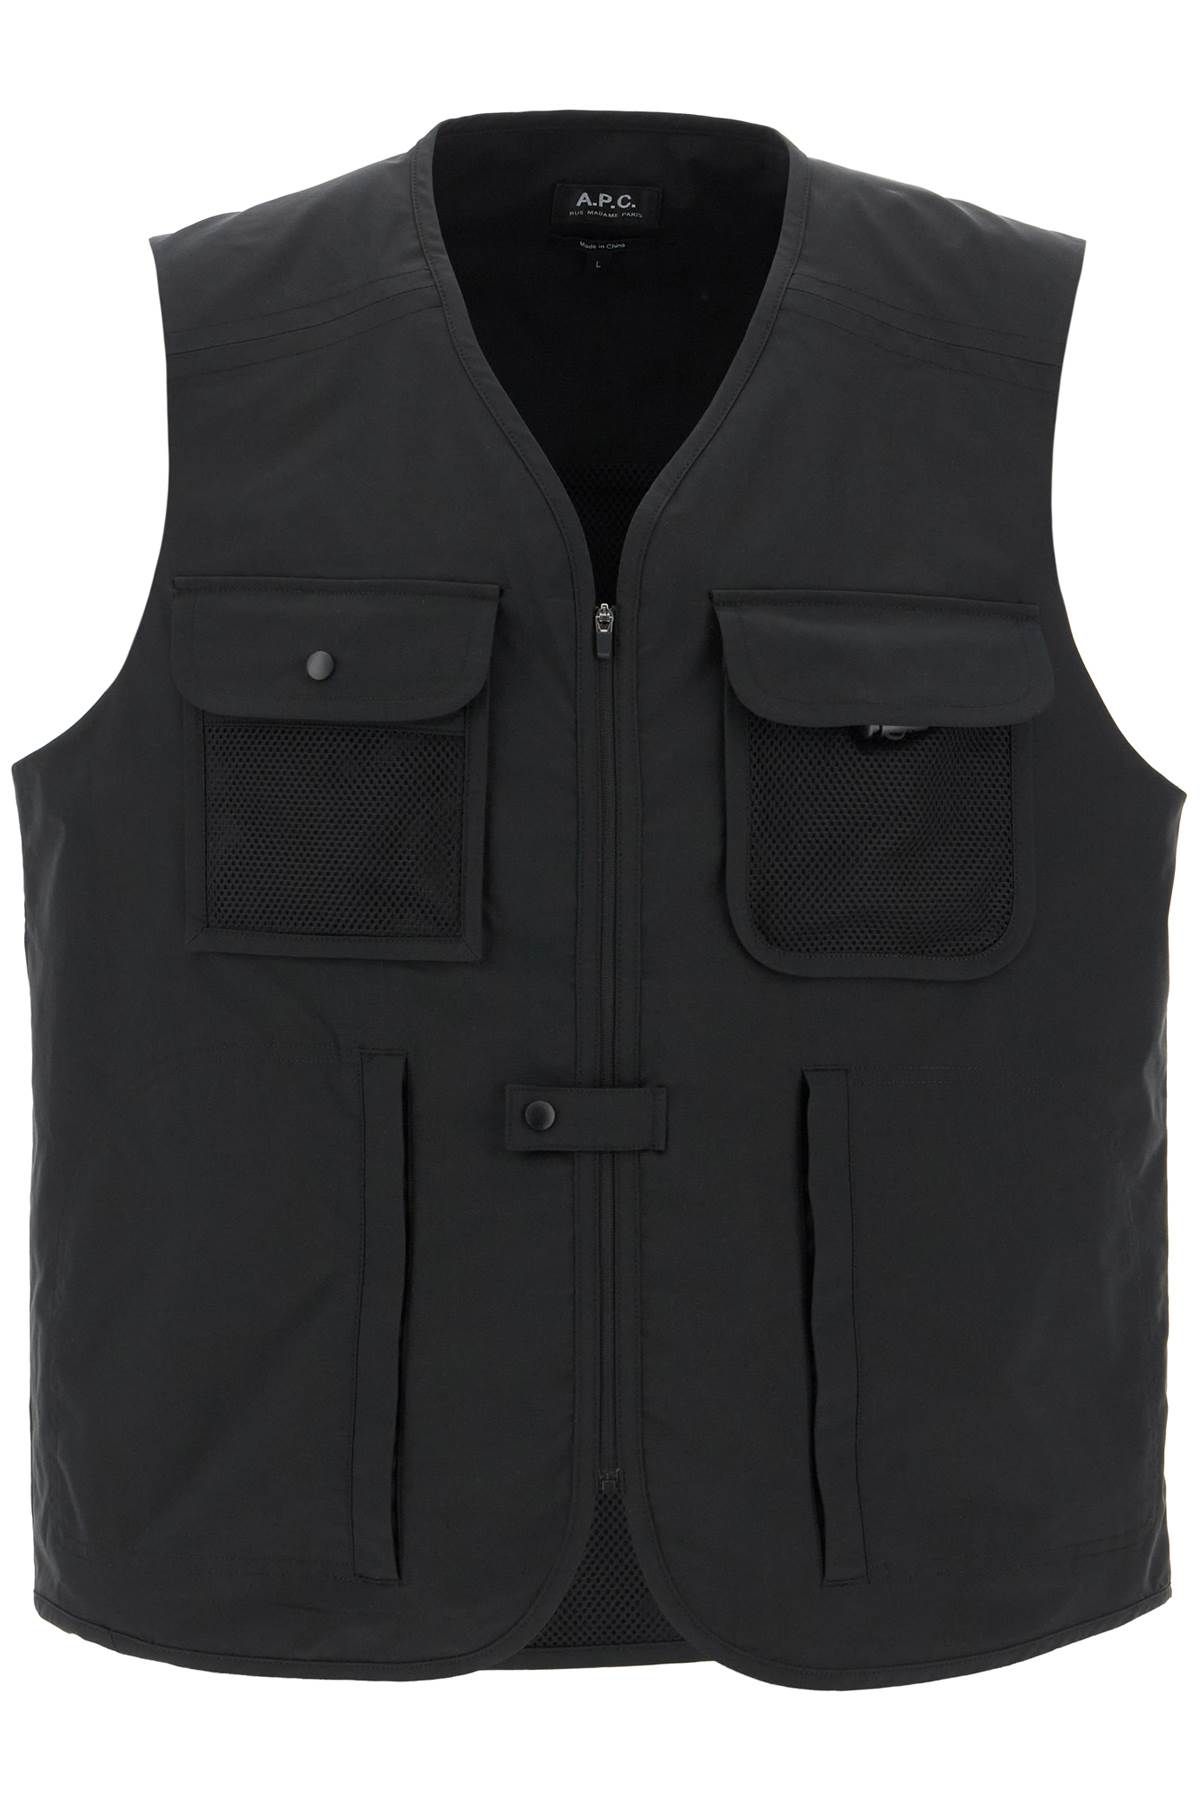 A.P.C. A. P.C. "alban technical fabric vest for